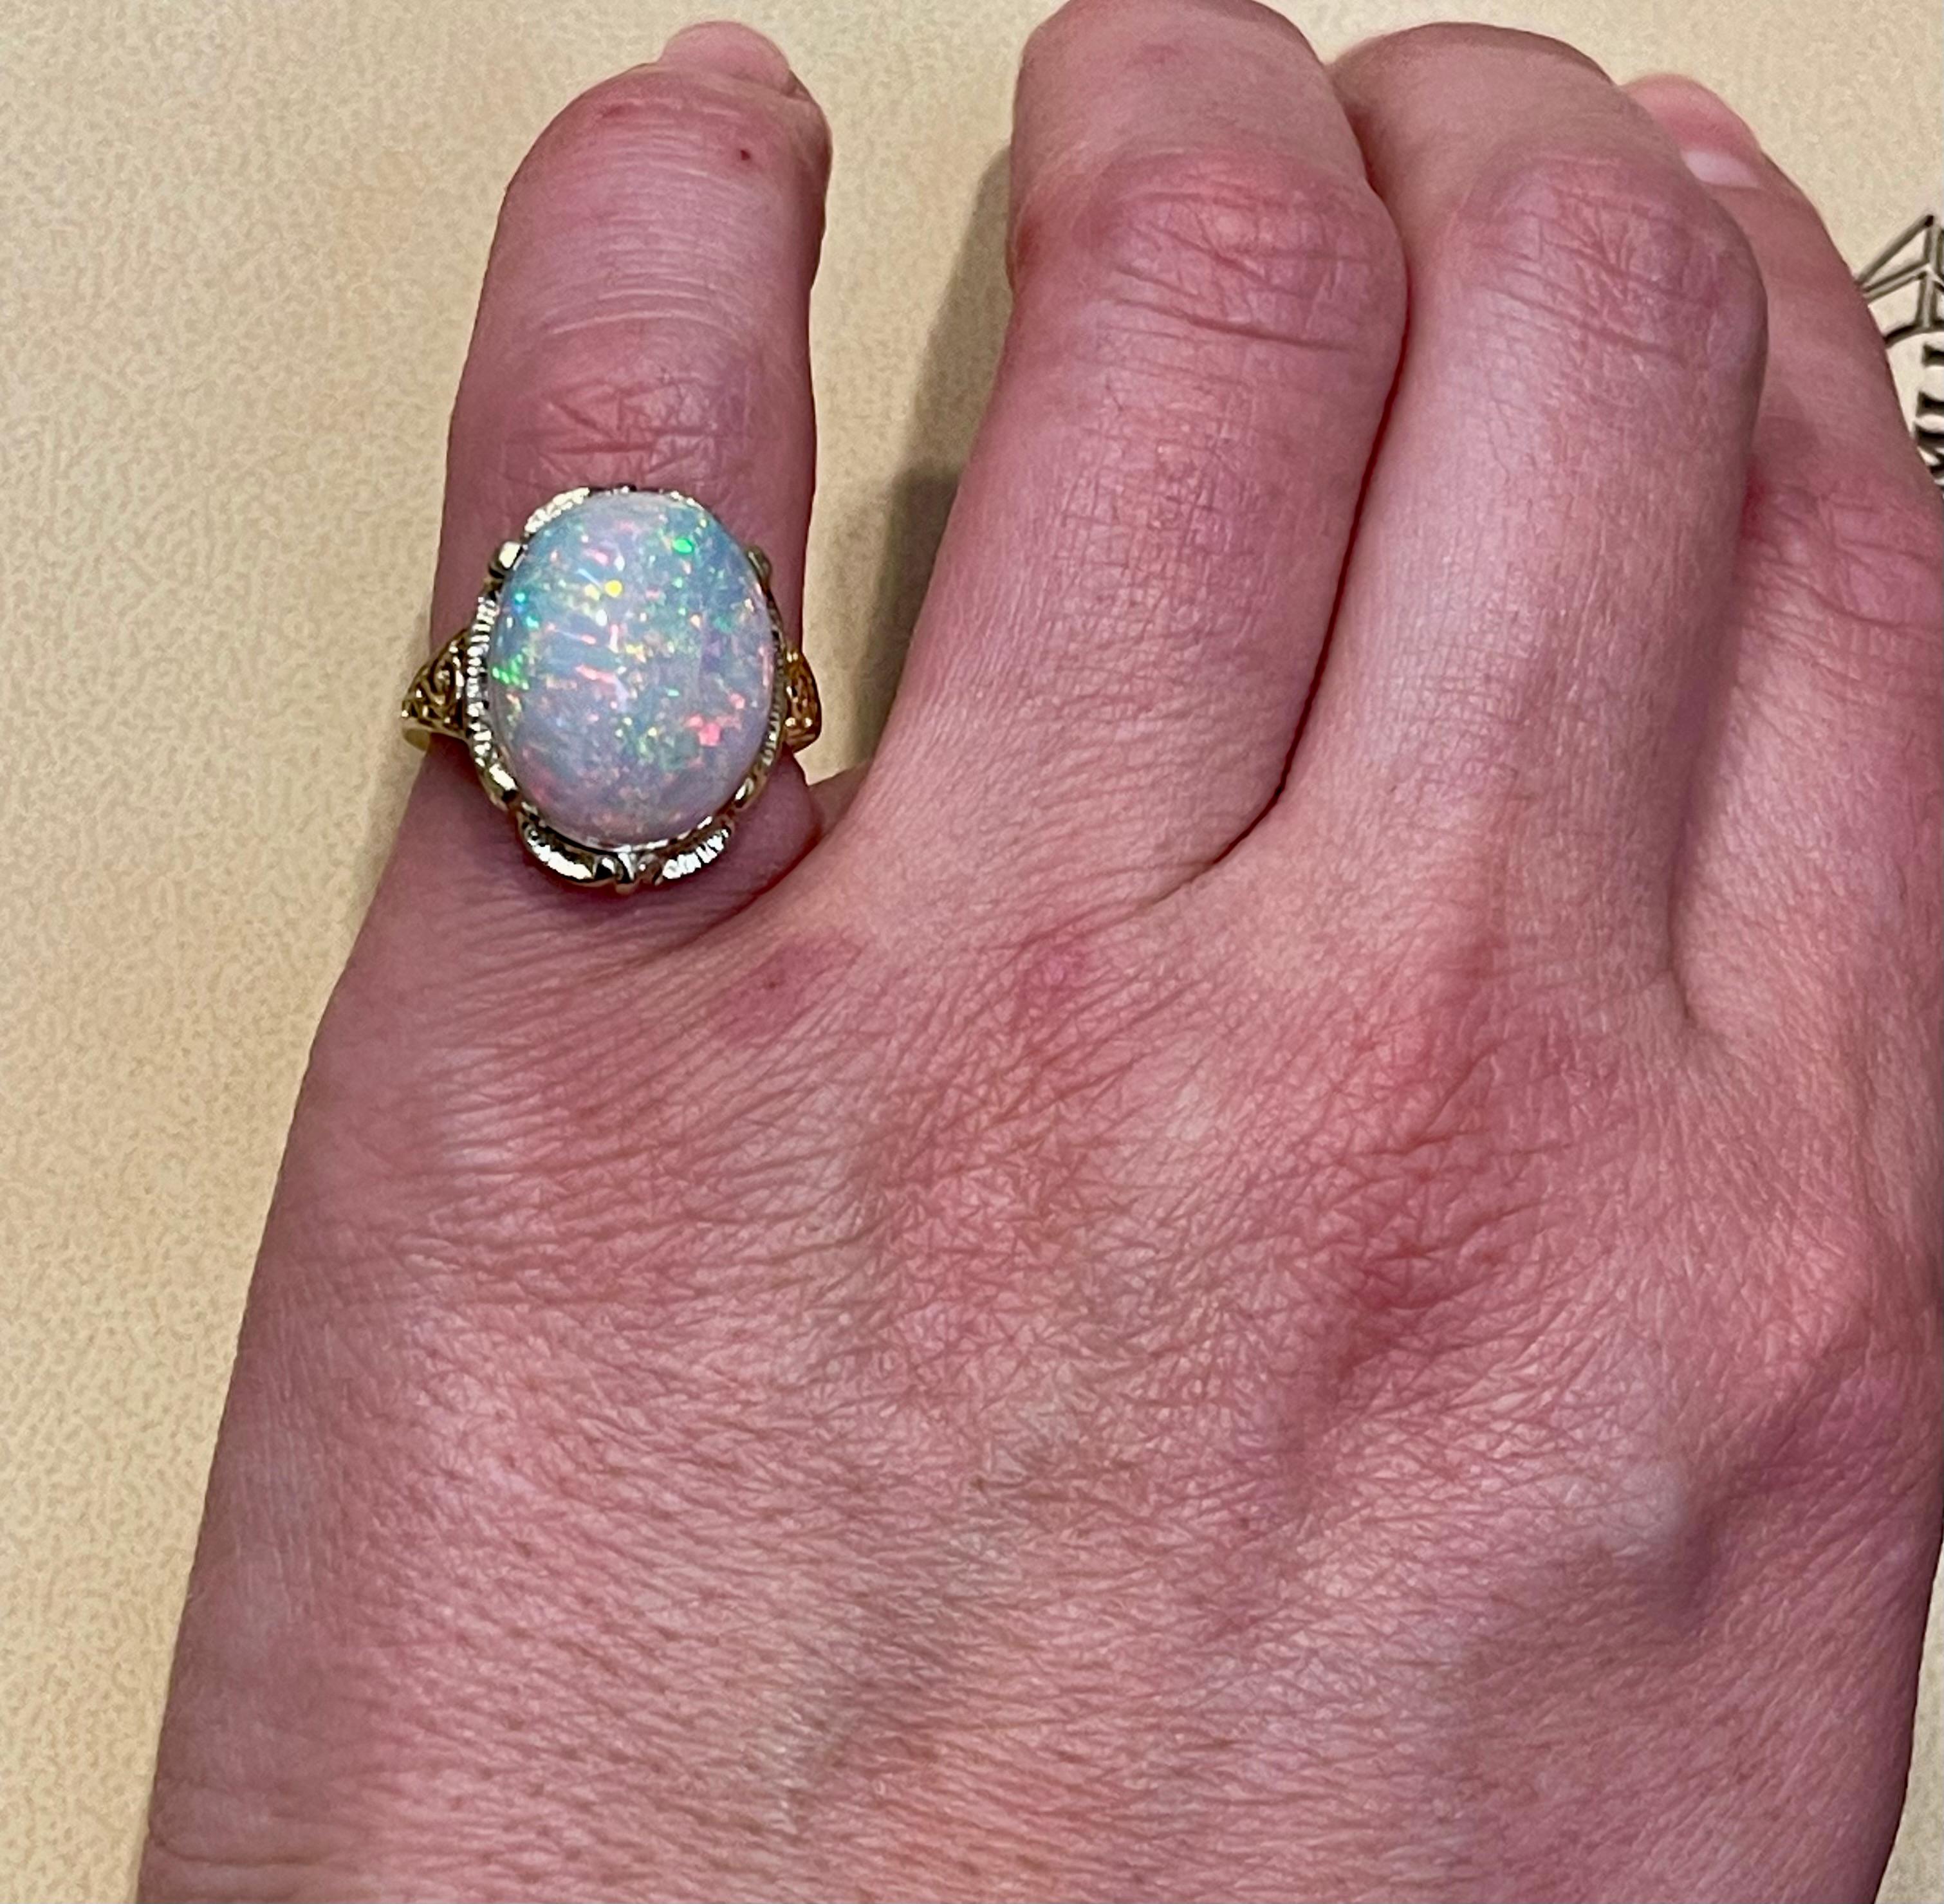 9 Carat Oval Shape Ethiopian Opal Cocktail Ring 14 Karat Yellow Gold In Excellent Condition For Sale In New York, NY